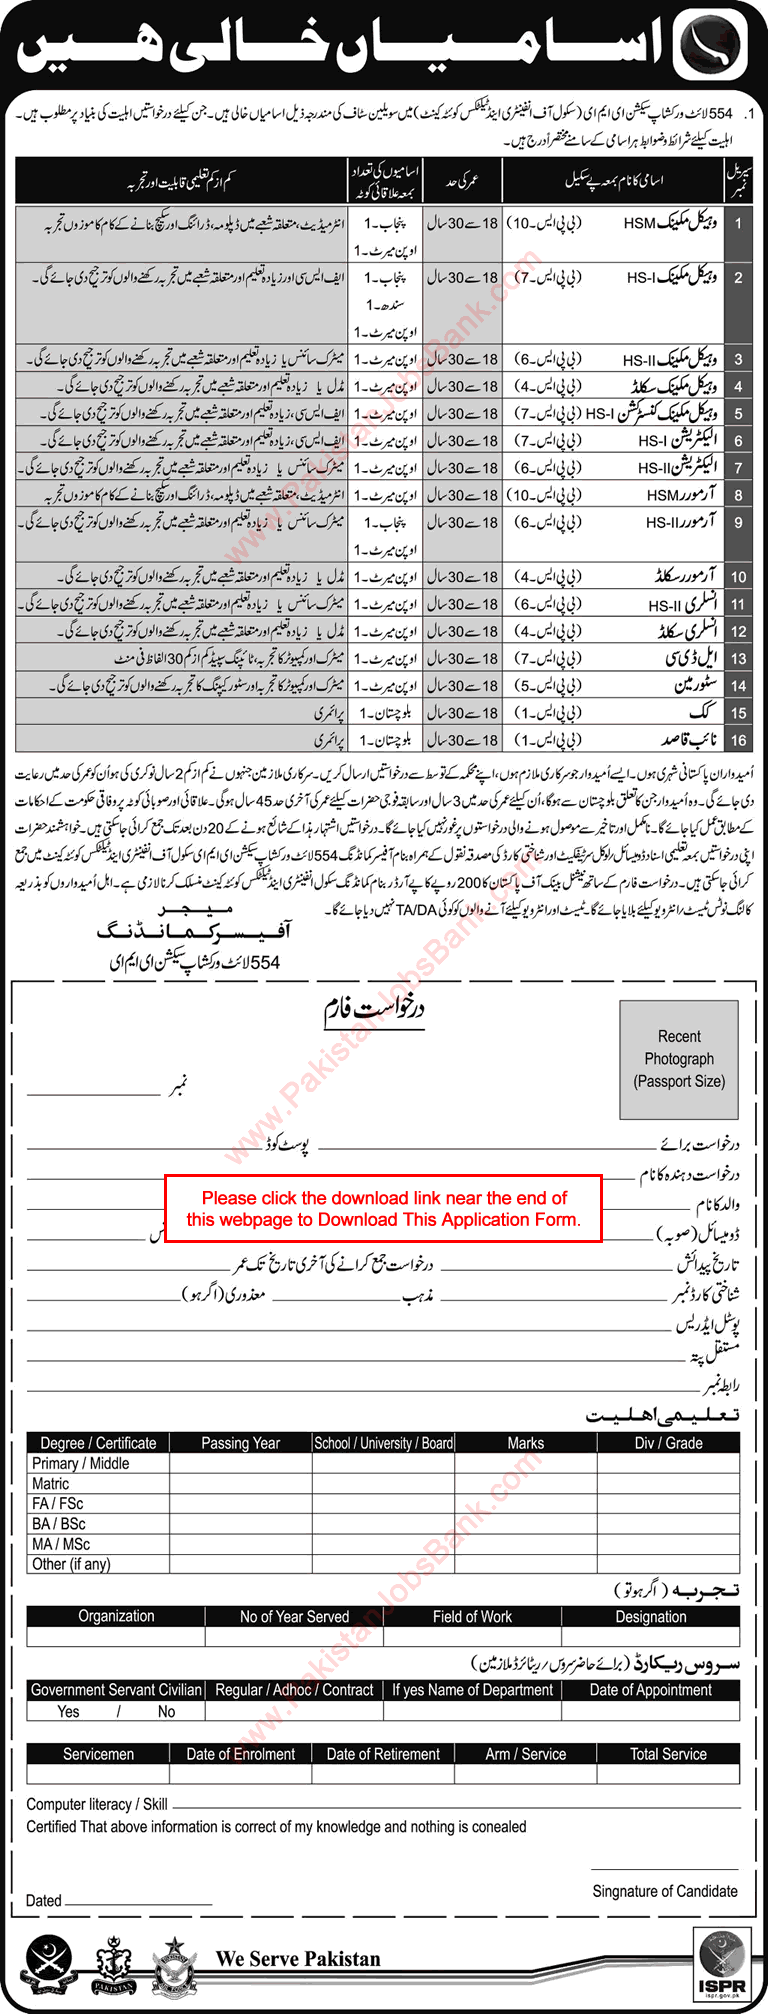 554 Light Workshop Section EME Quetta Jobs 2015 May Application Form Download School of Infantry and Tactics Latest